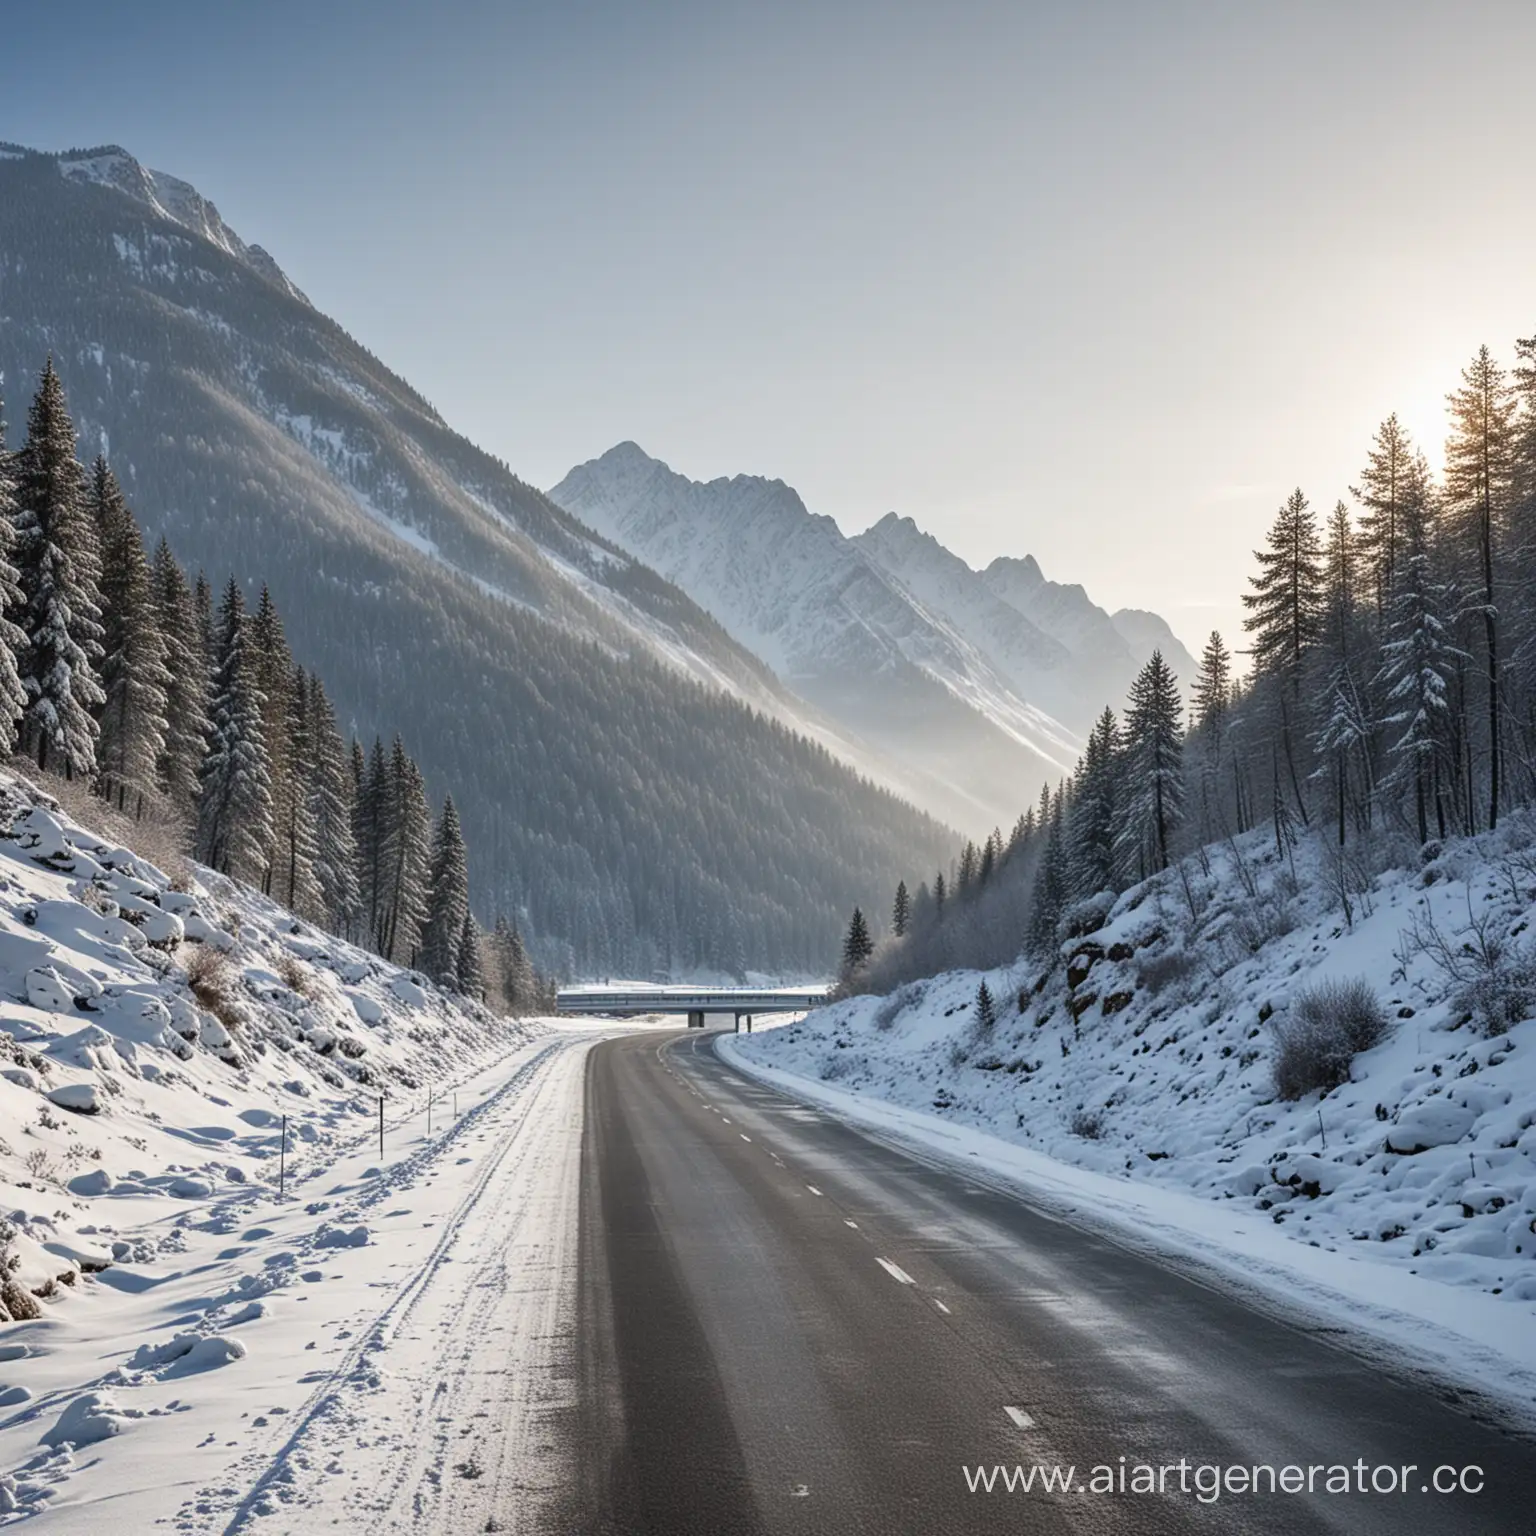 Scenic-Mountain-Drive-in-Daylight-with-Snowy-Landscape